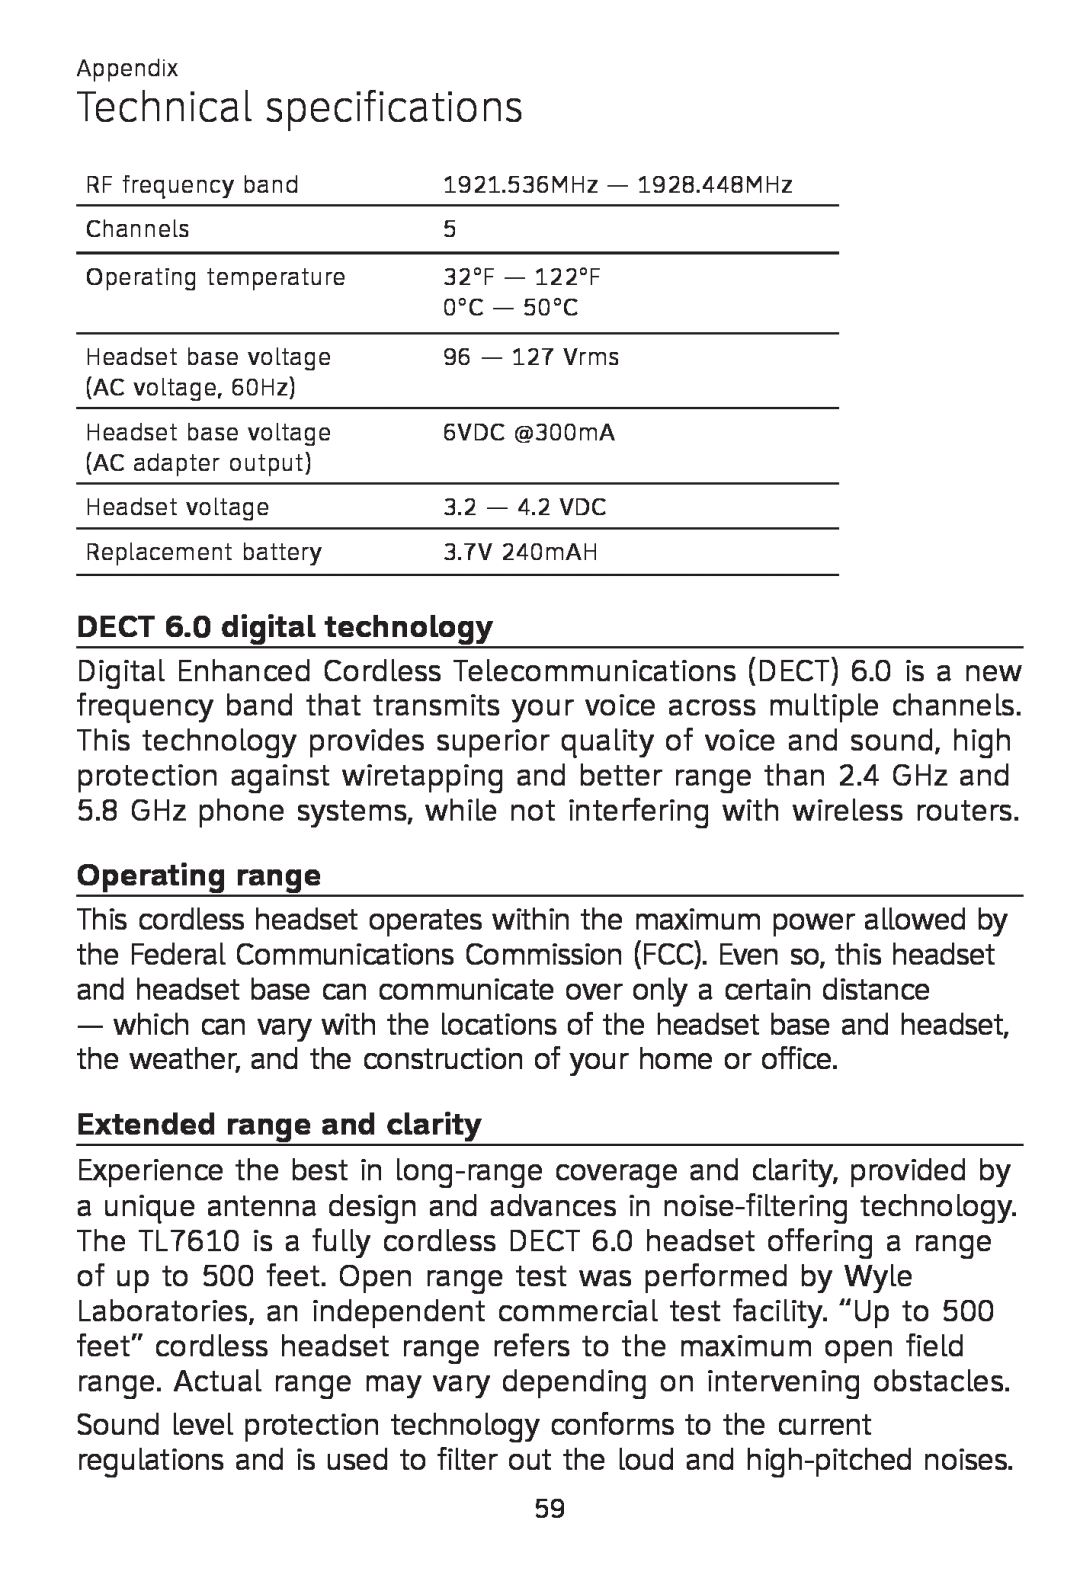 AT&T TL 7610 user manual Technical specifications, DECT 6.0 digital technology, Operating range, Extended range and clarity 